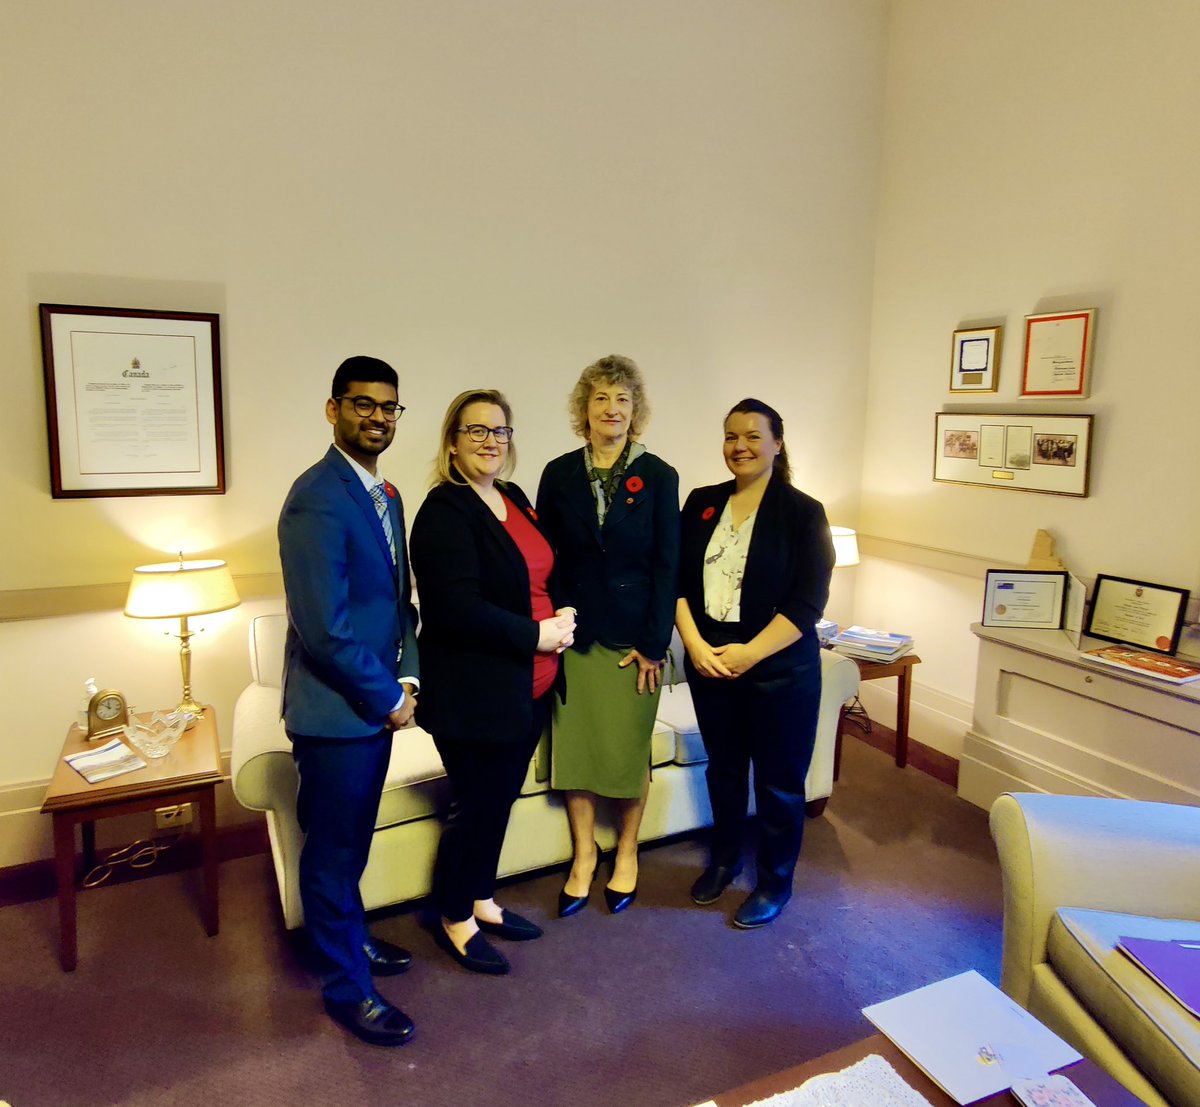 Pleased to meet with @YukonSenator to discuss investing in the #MedicalRadiationTechnologist workforce. Truly grateful to discuss the essential role of MRTs in the healthcare system throughout Canada. #CAMRTHillDay @CAMRT_ACTRM #ProudMRT with @SarahErdelyi + Vishal Vara